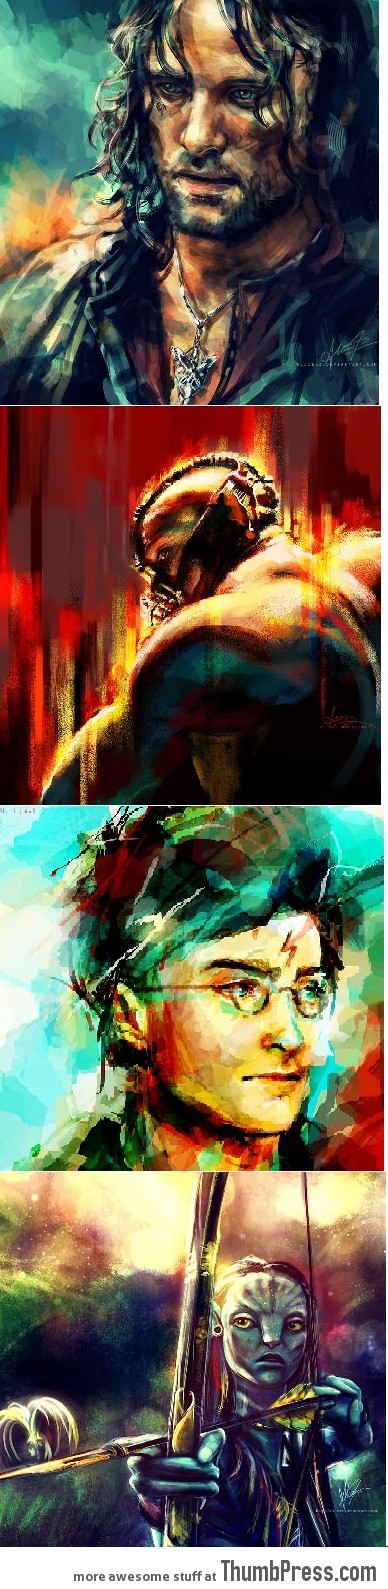 Awesome Artworks